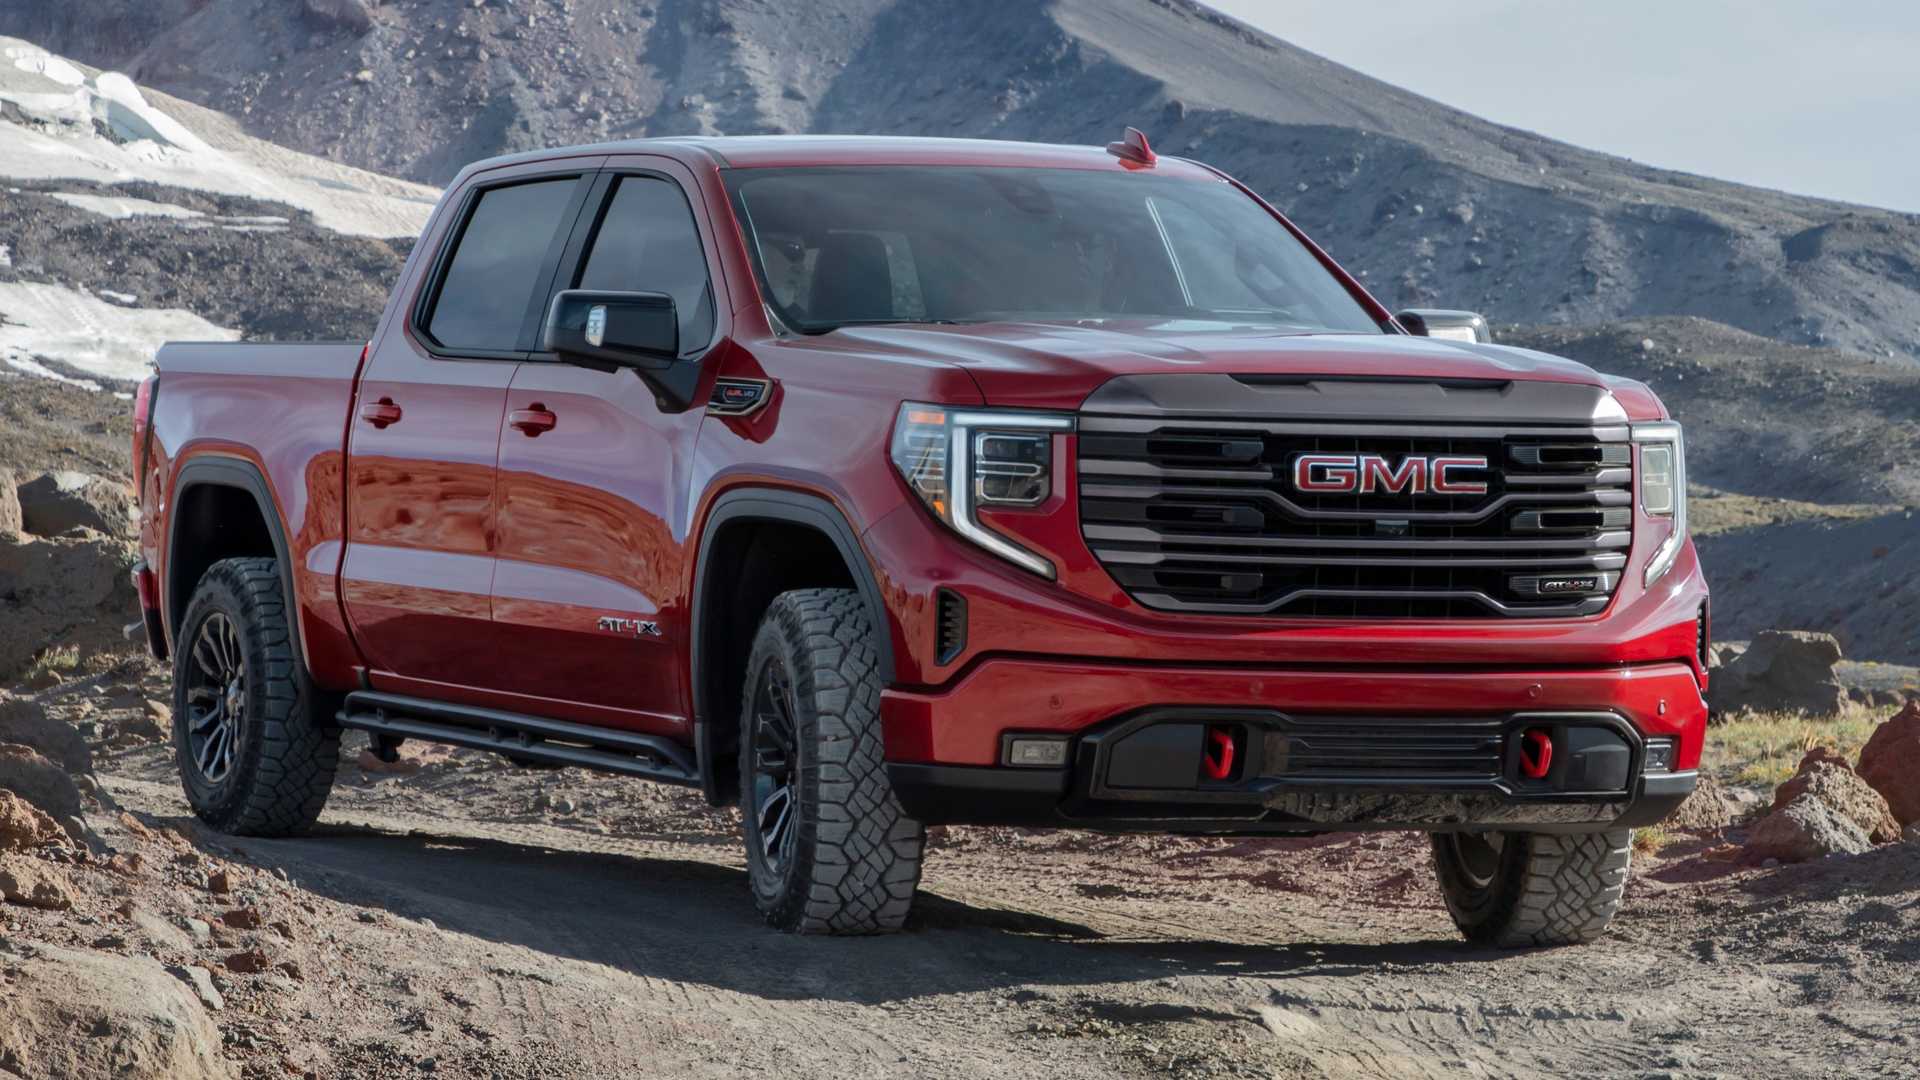 Luxury or off-road performance for the 2022 GMC Sierra 1500?